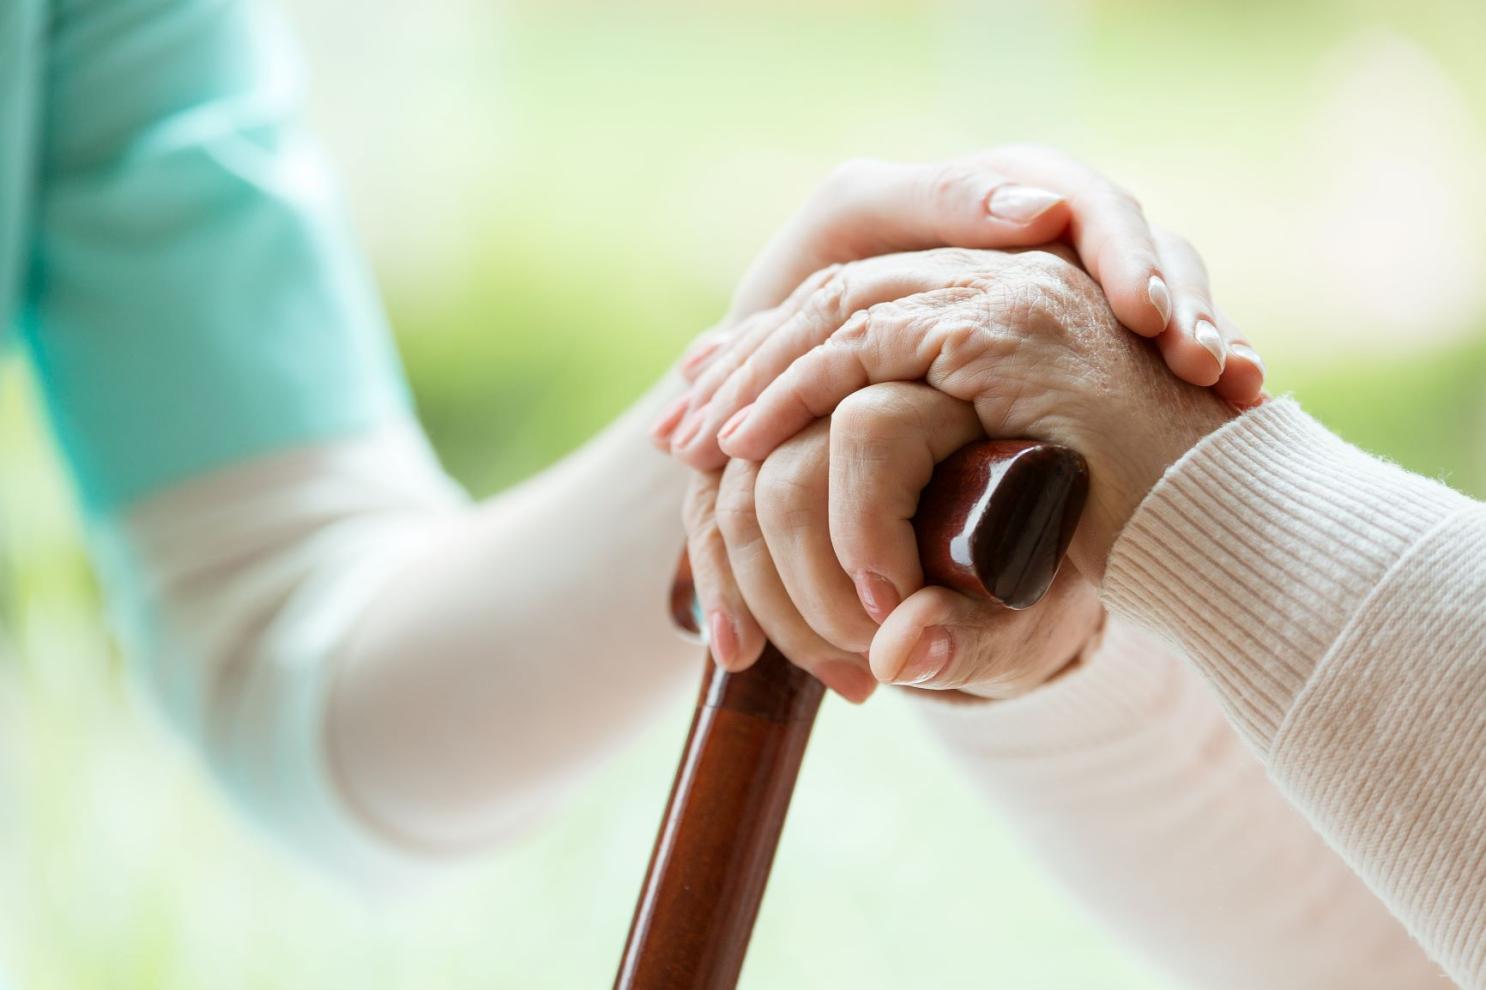 What Types of Therapies Are Offered in Medical Rehab Facilities for the Elderly?